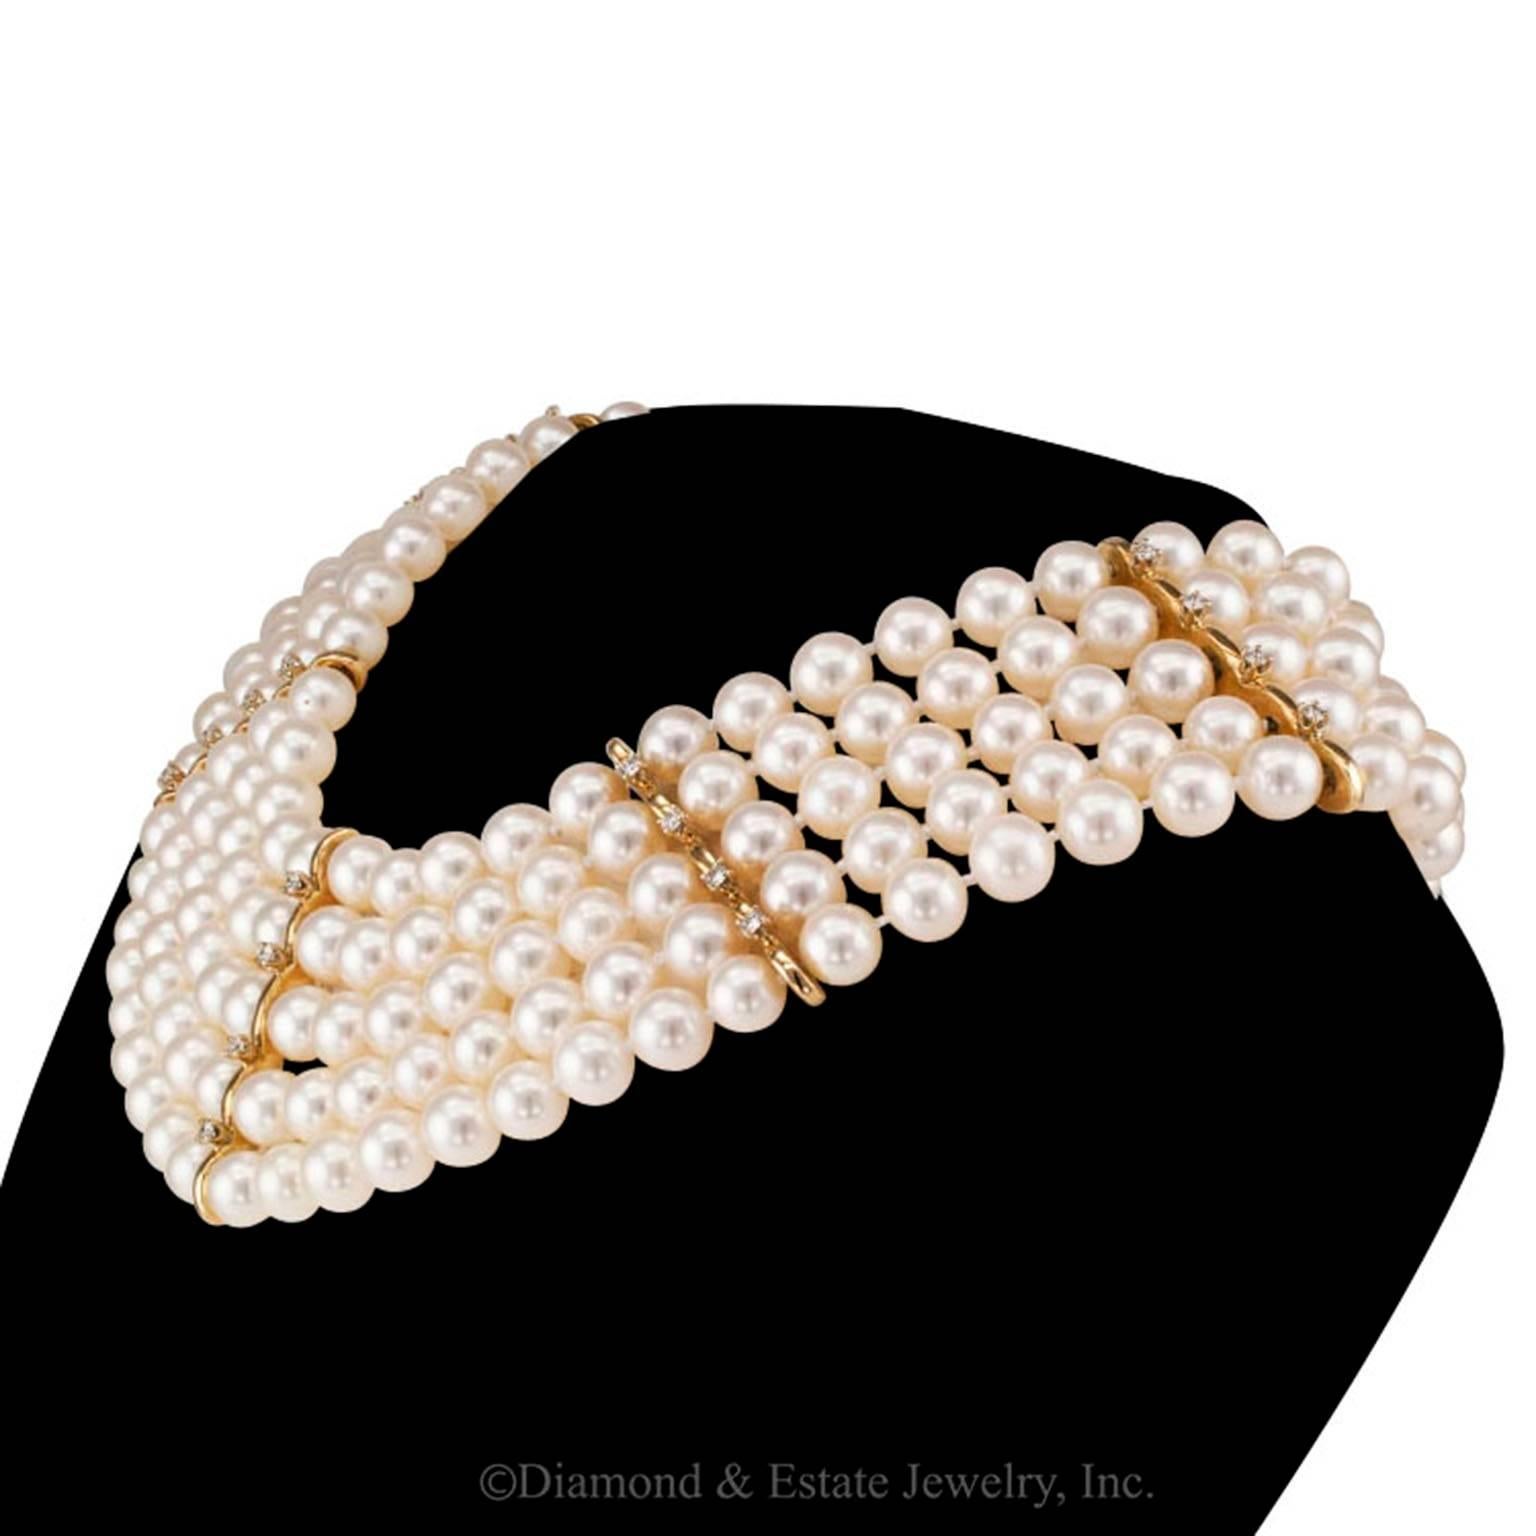 Mastoloni Cultured Pearl Diamond Choker-collar

Mastolony cultured pearl and diamond choker/collar.  Comprising five nested strands of Akoya cultured pearls measuring 6 1/2 - 7 mm with five diamond spacers set at equal intervals to the fore, the